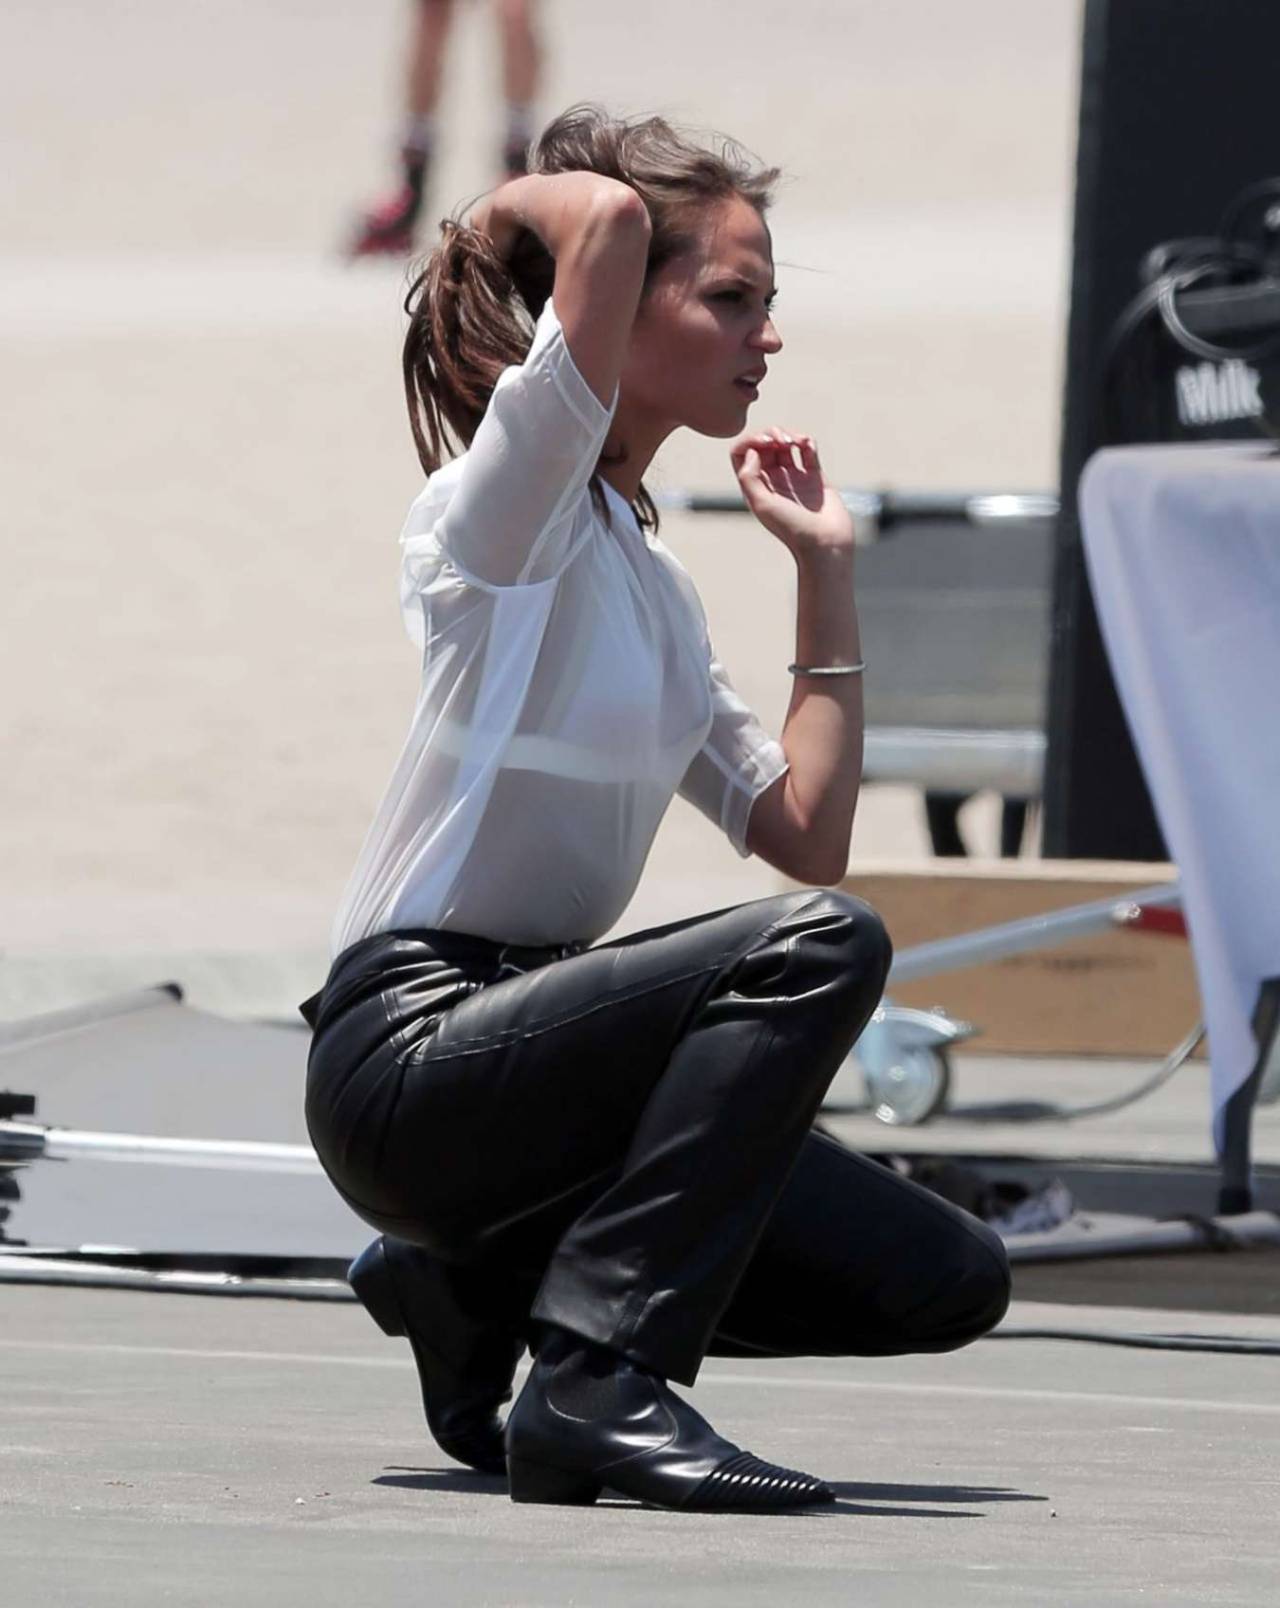 Women in Leather, Latex, and Corsets, Alicia Vikander in leather pants